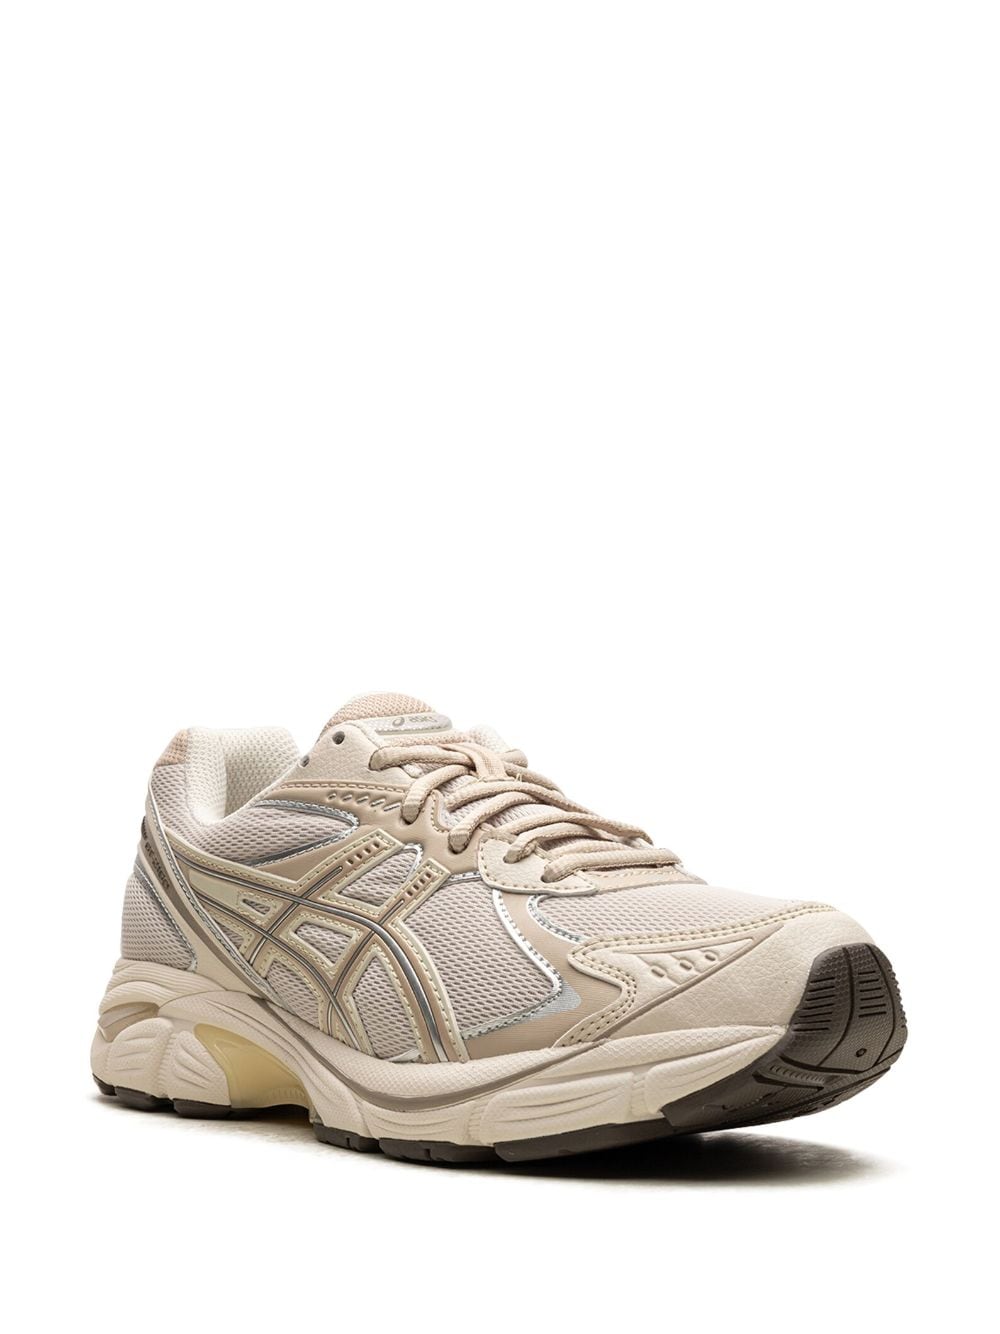 Image 2 of ASICS "tenis GT-2160 ""Oatmeal"""